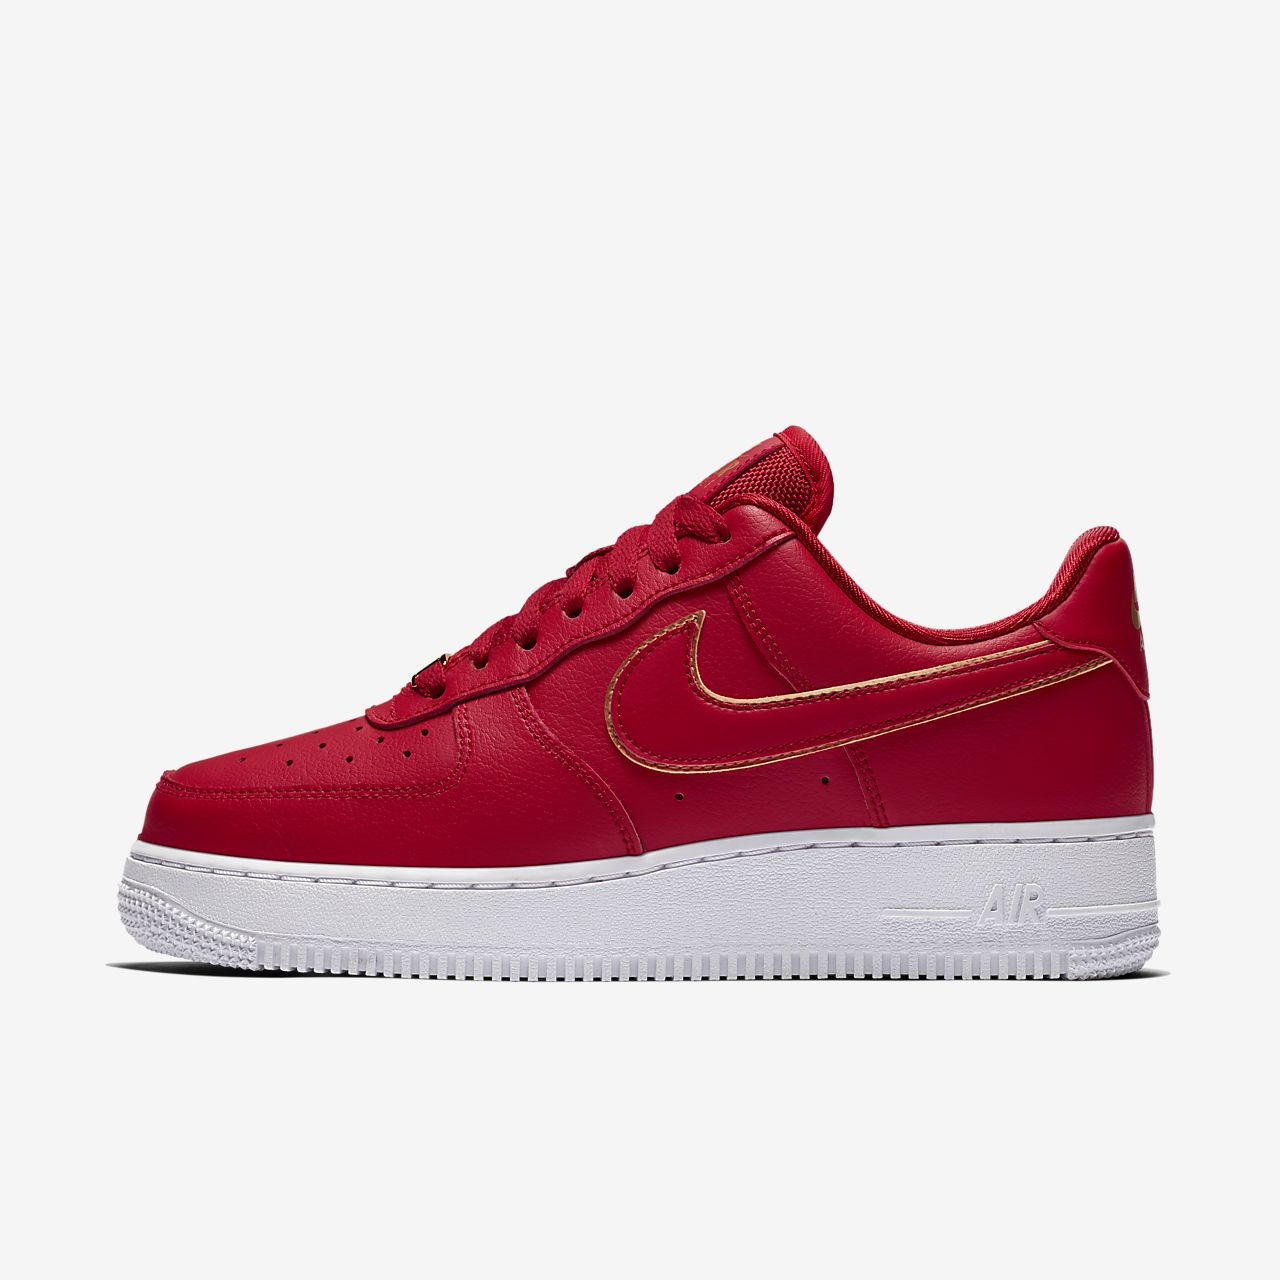 nike all red air force 1 cheap online